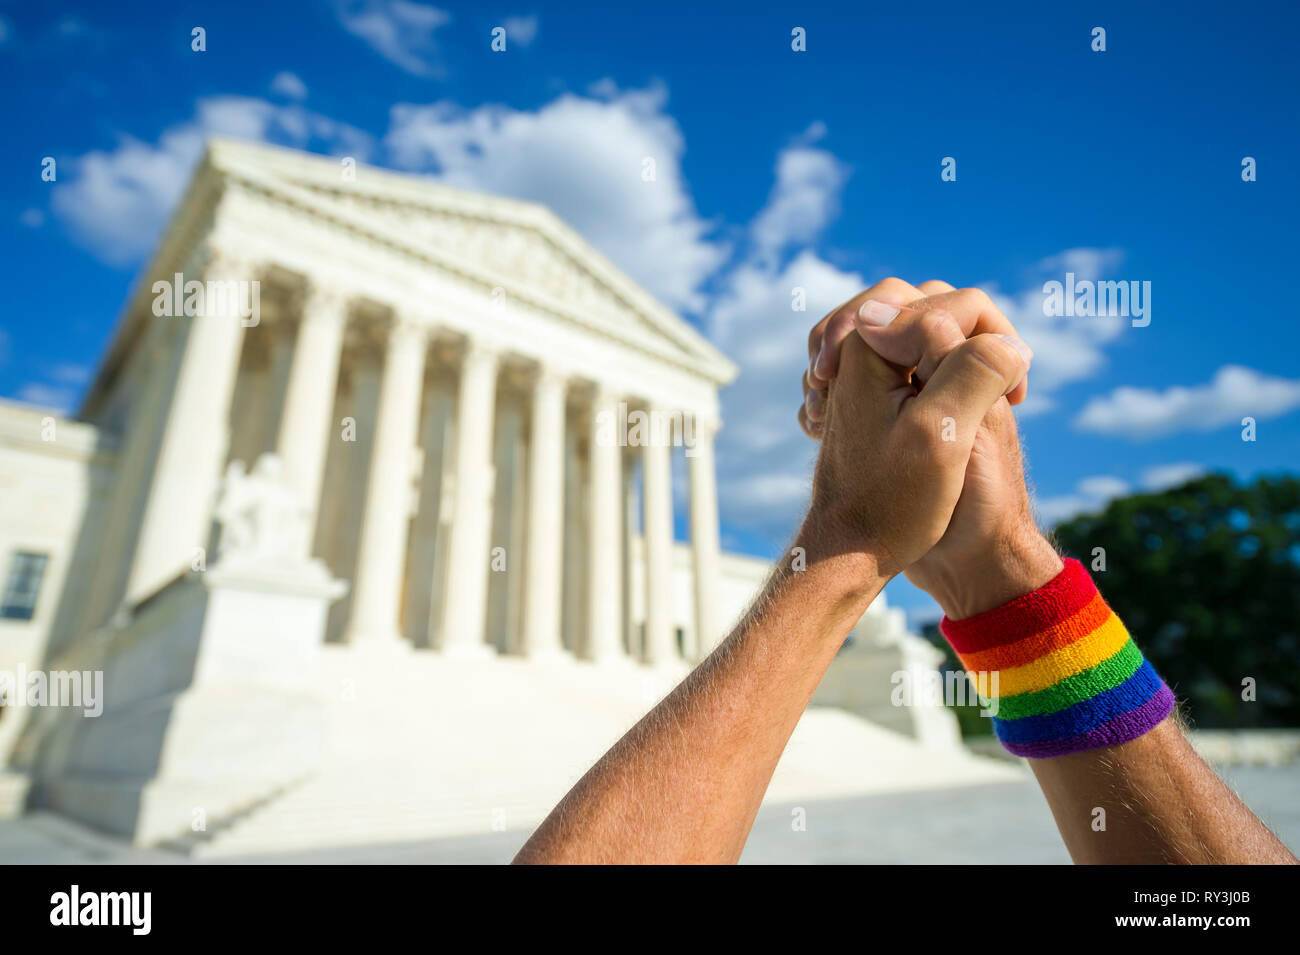 Pleading hands wearing gay pride rainbow flag wristband clasped in prayer outside the Supreme Court building in Washington, DC, USA Stock Photo